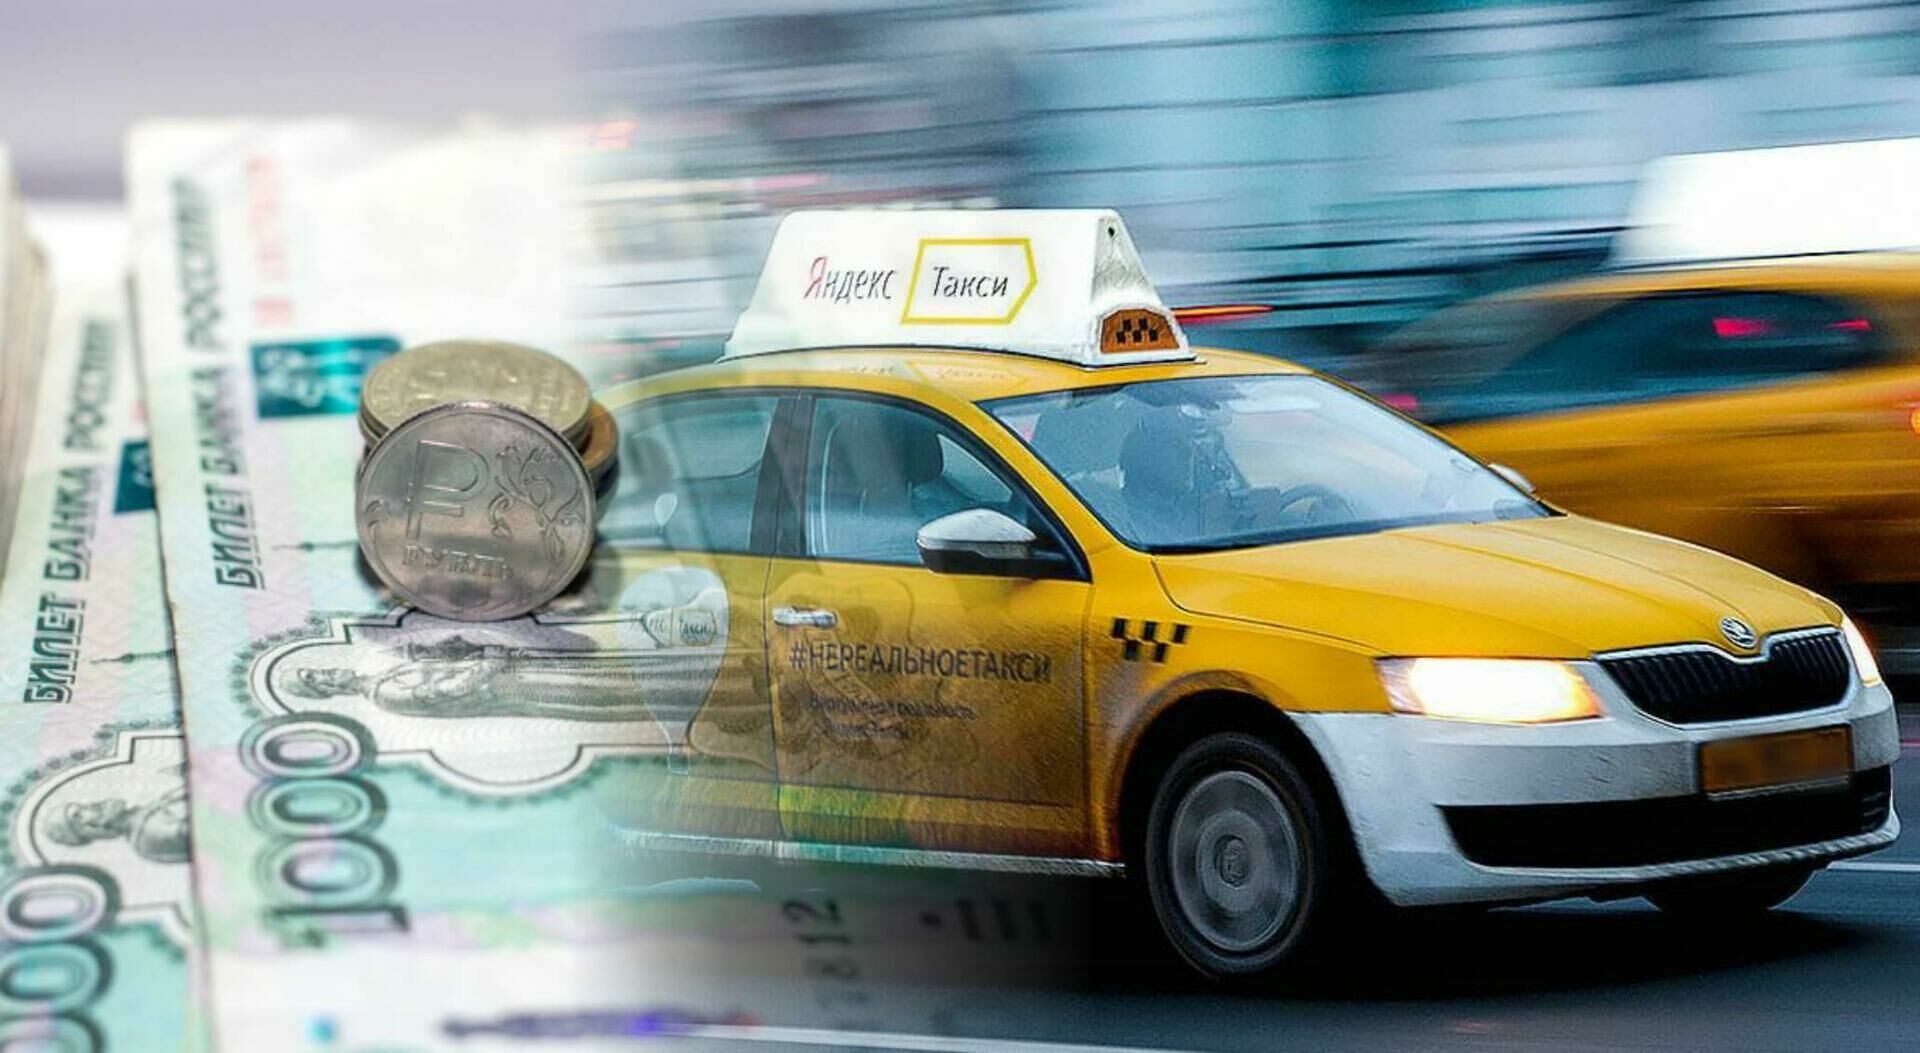 "Let's do it off the books!" How taxi drivers and hoteliers cheat their aggregators